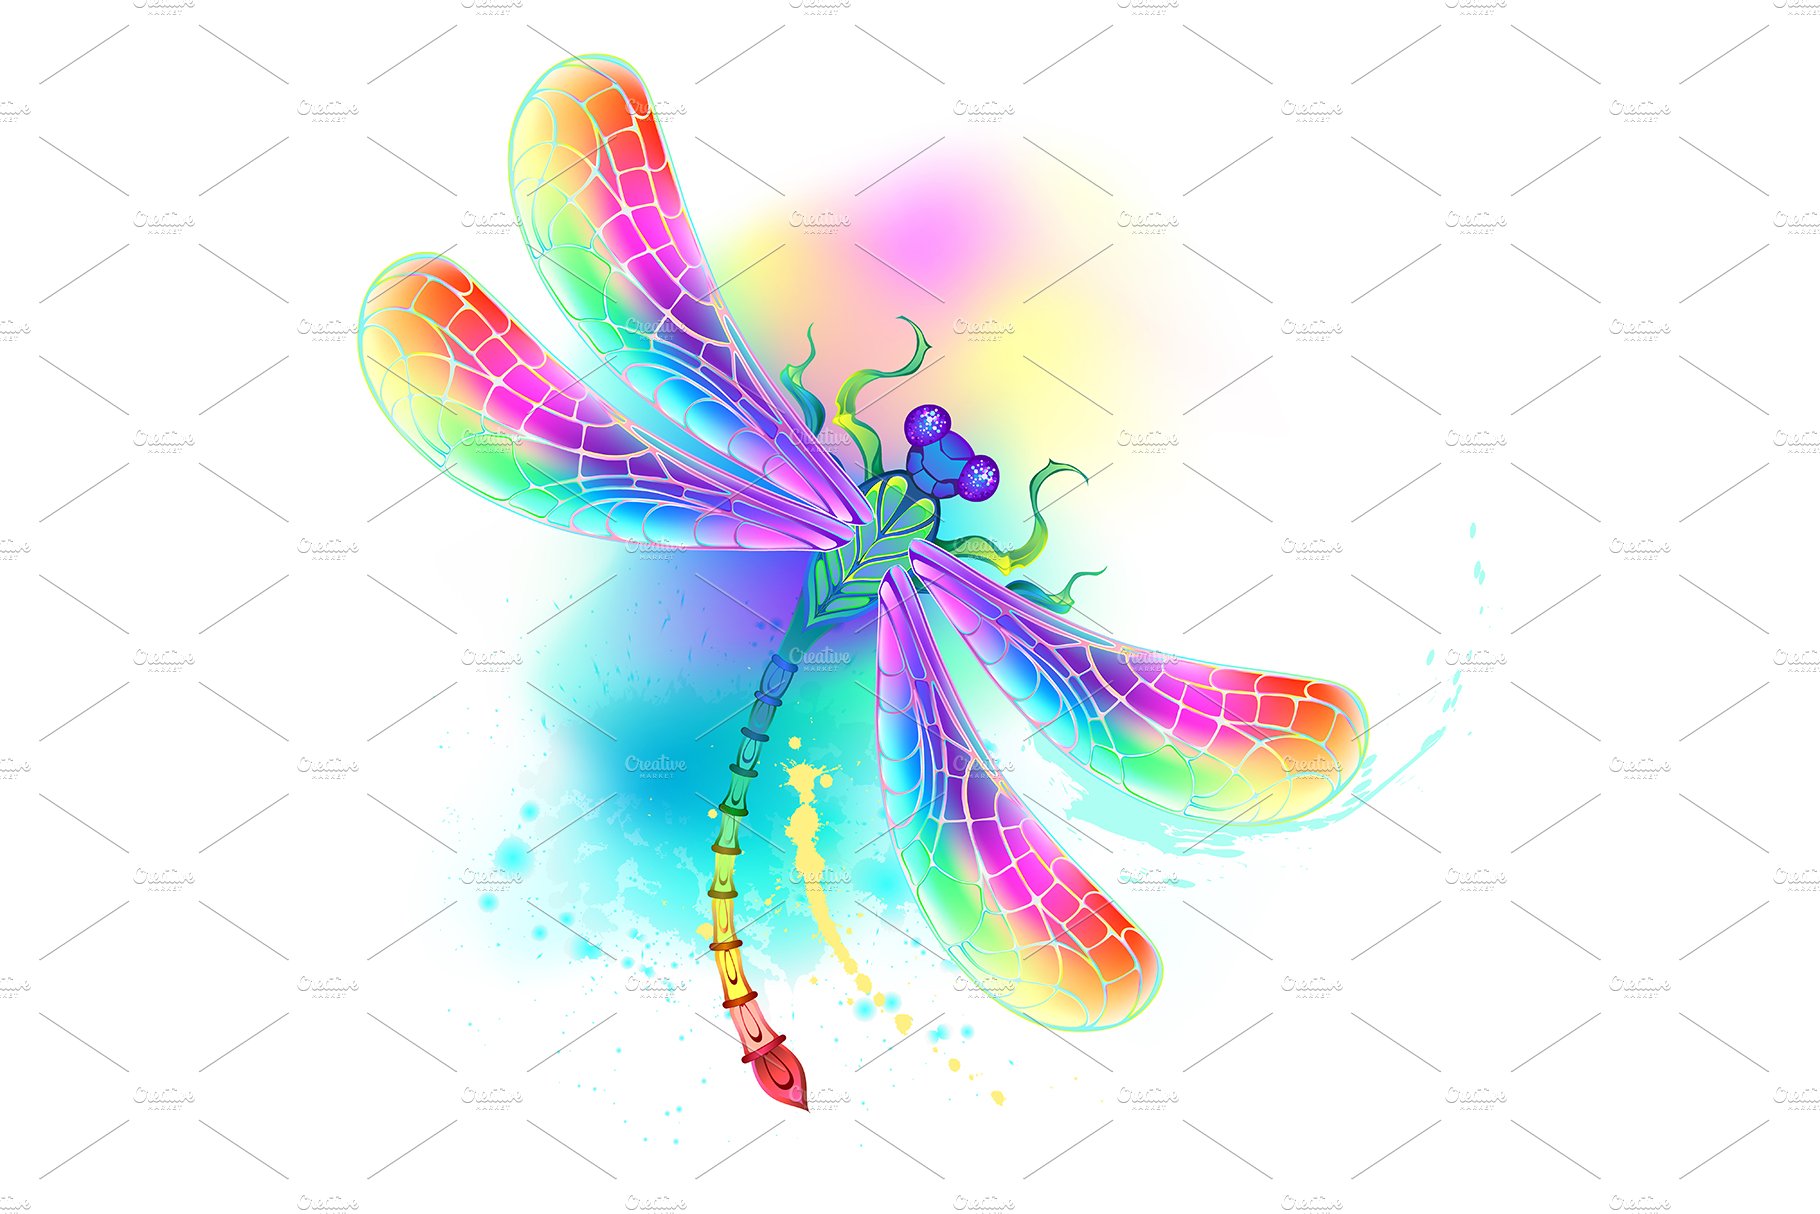 Rainbow dragonfly on watercolor cover image.